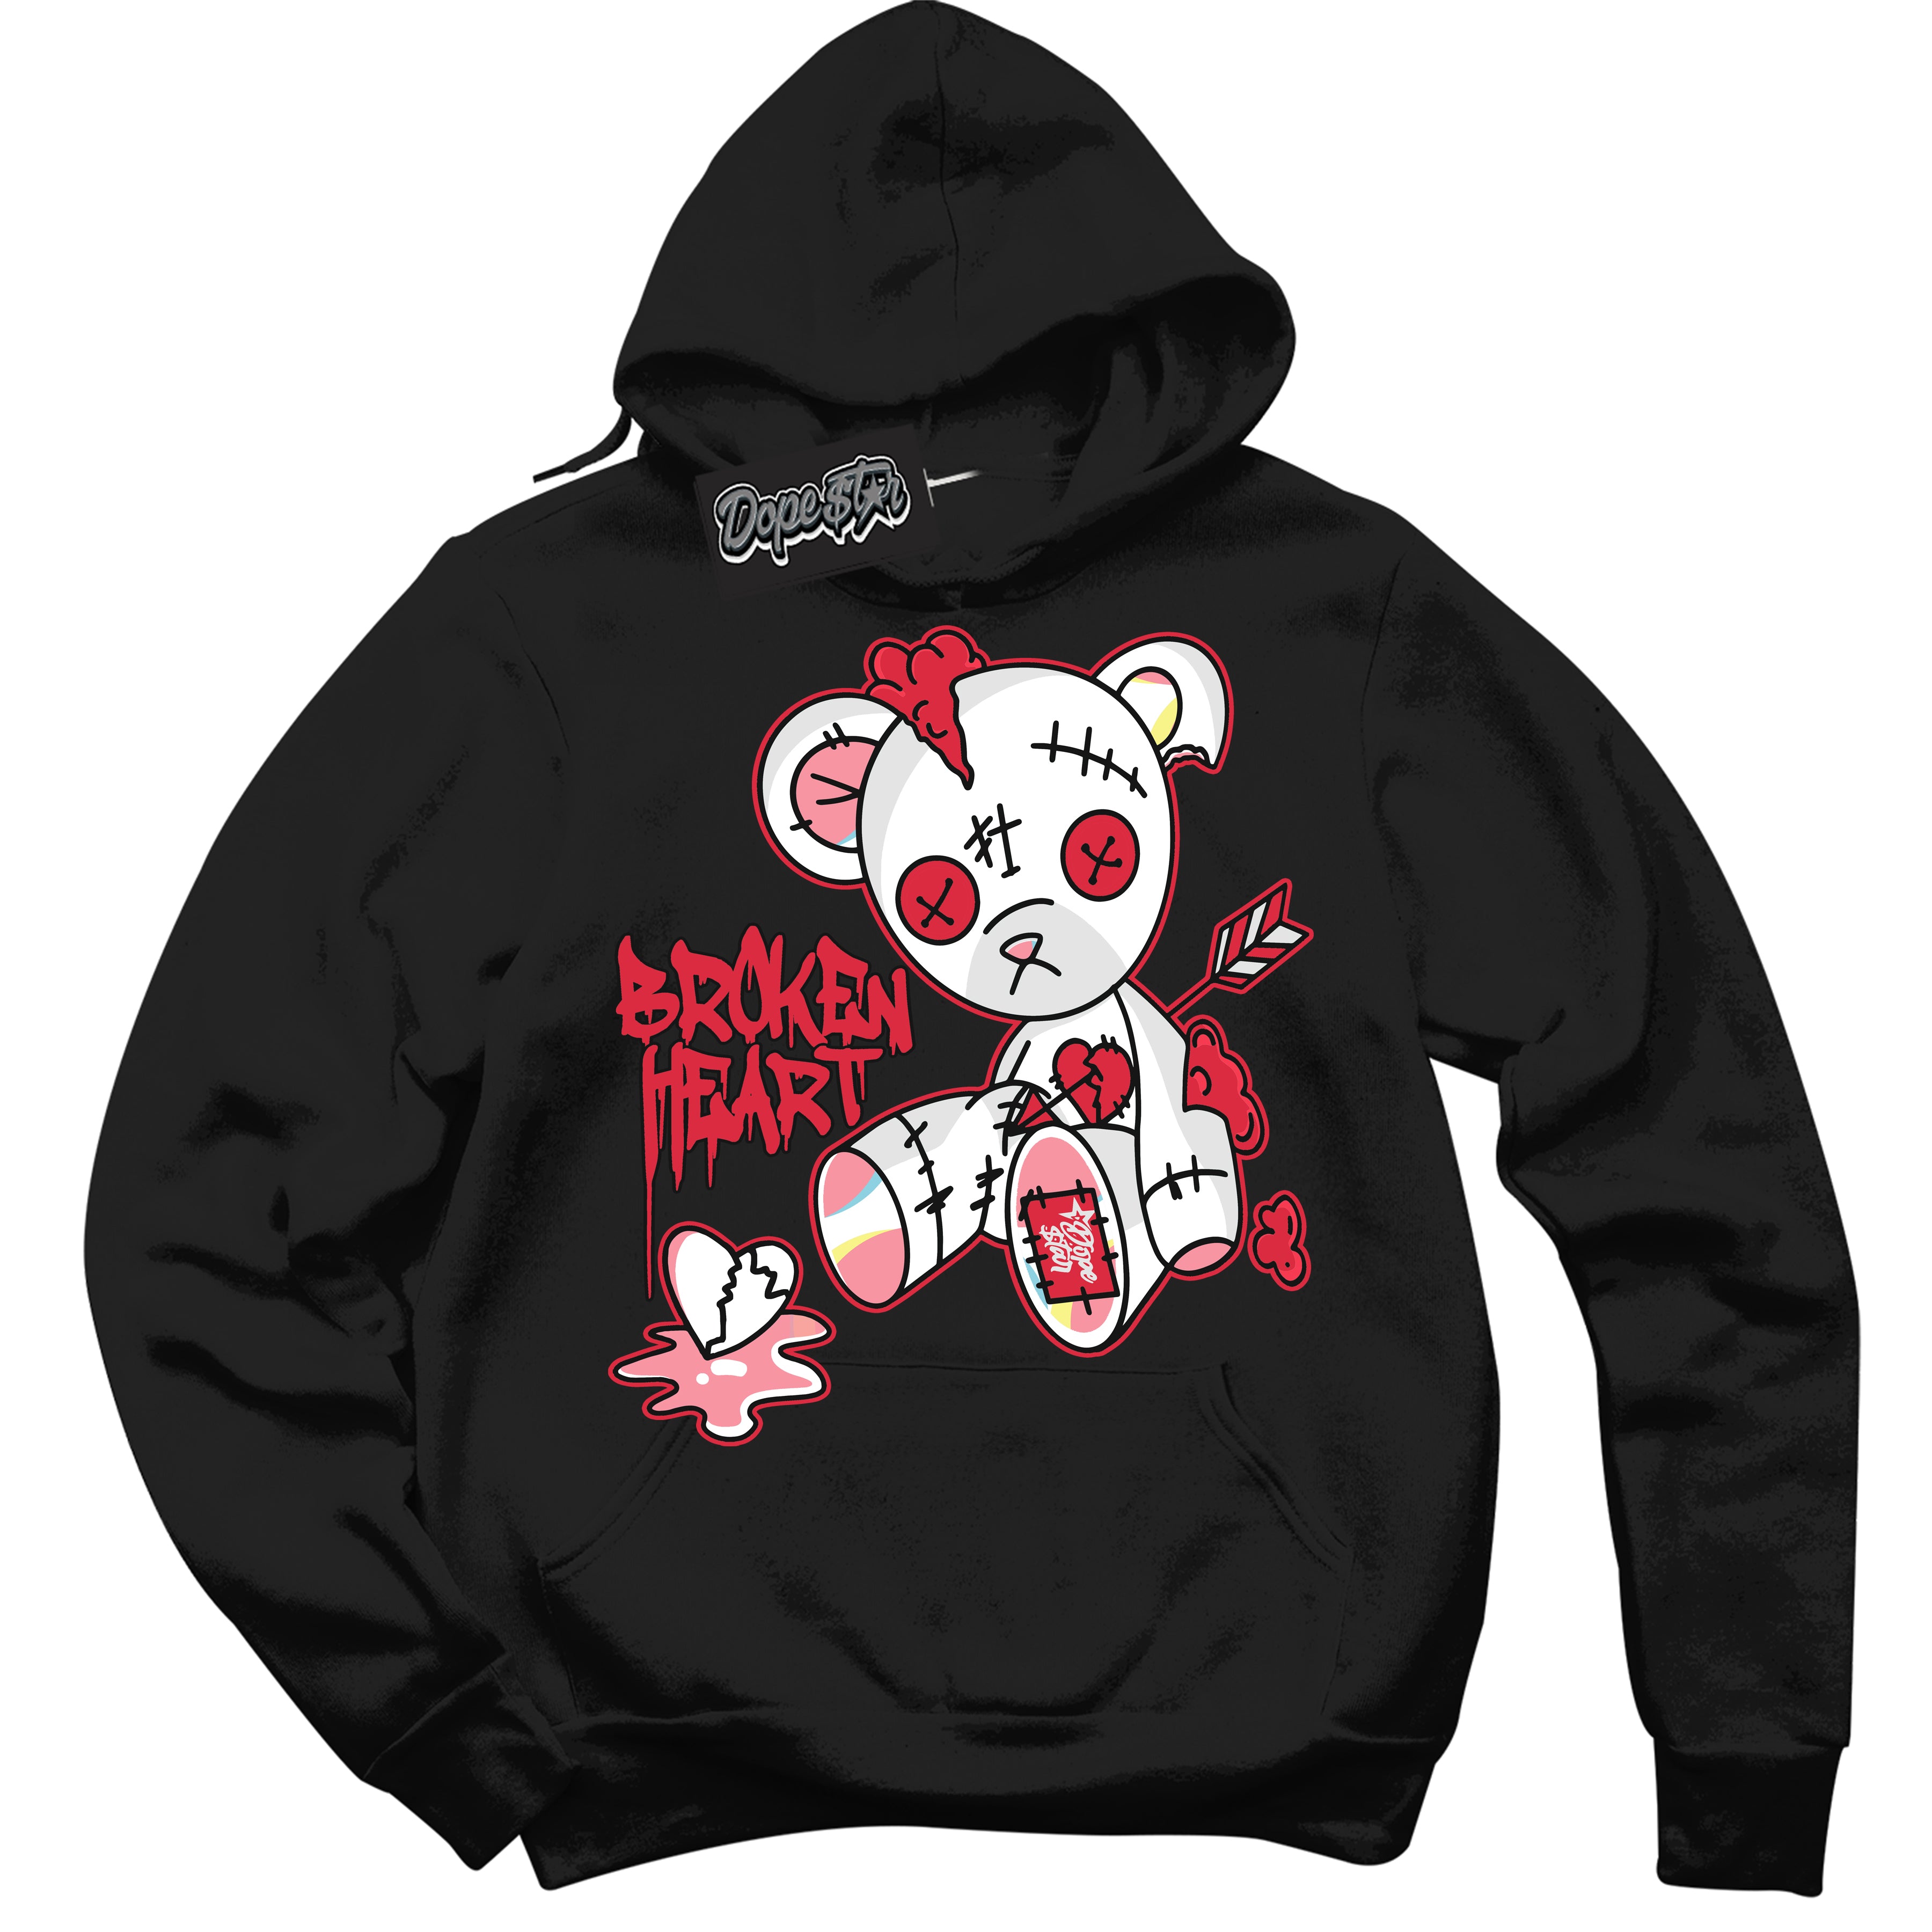 Cool Black Graphic DopeStar Hoodie with “ Broken Heart Bear “ print, that perfectly matches Spider-Verse 1s sneakers